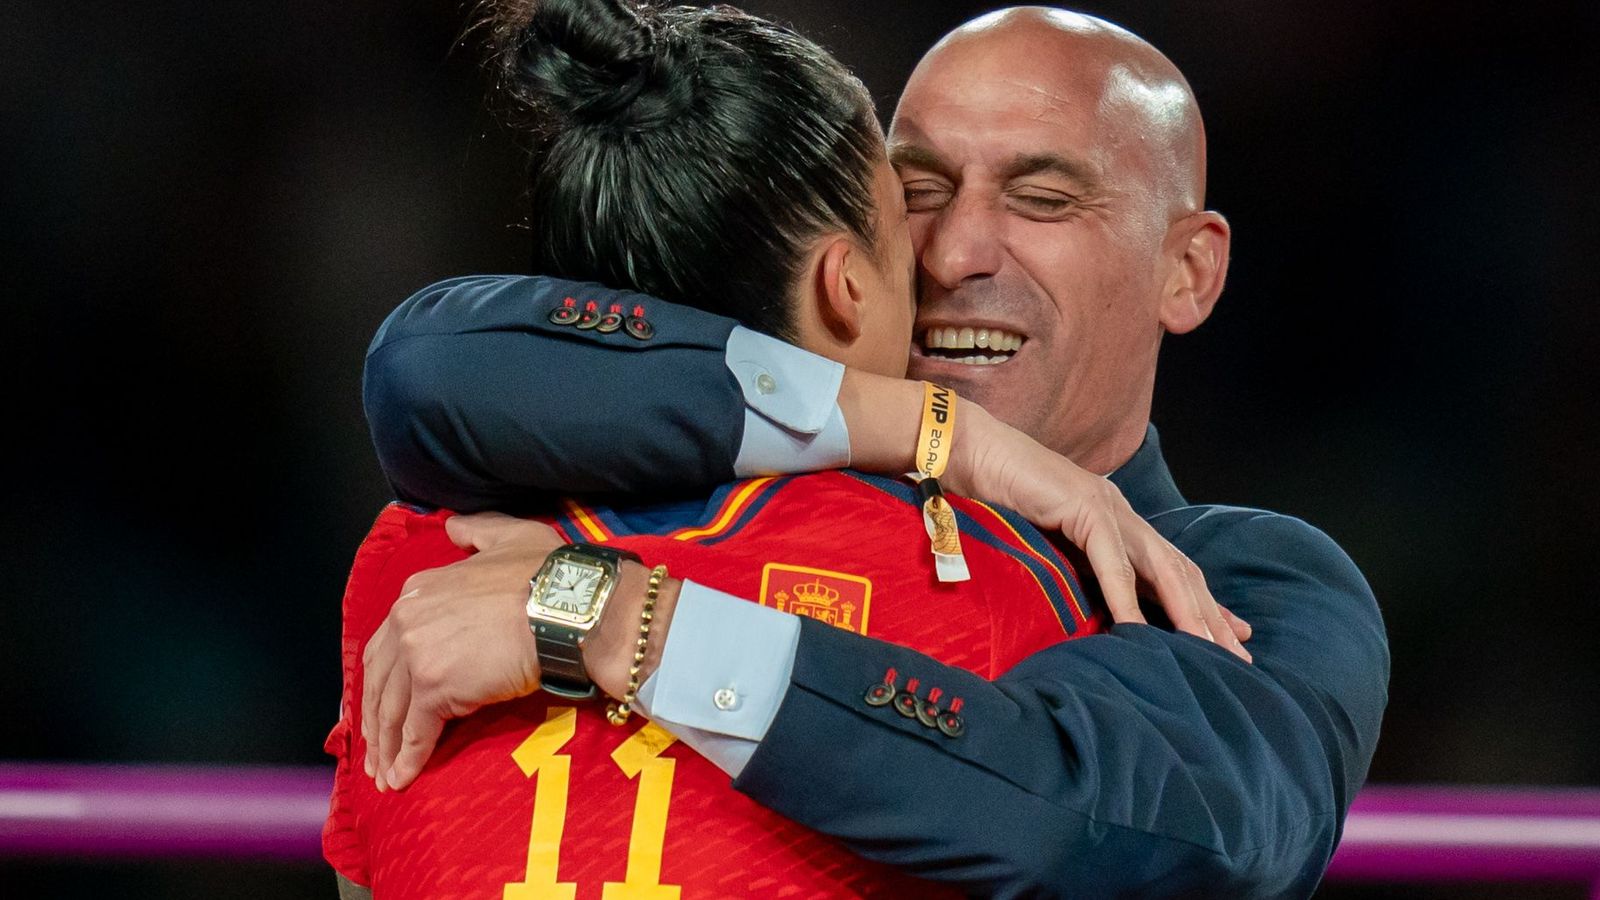 Luis Rubiales: Spanish football chief accuses Jenni Hermoso of lying over kiss at Women's World Cup final